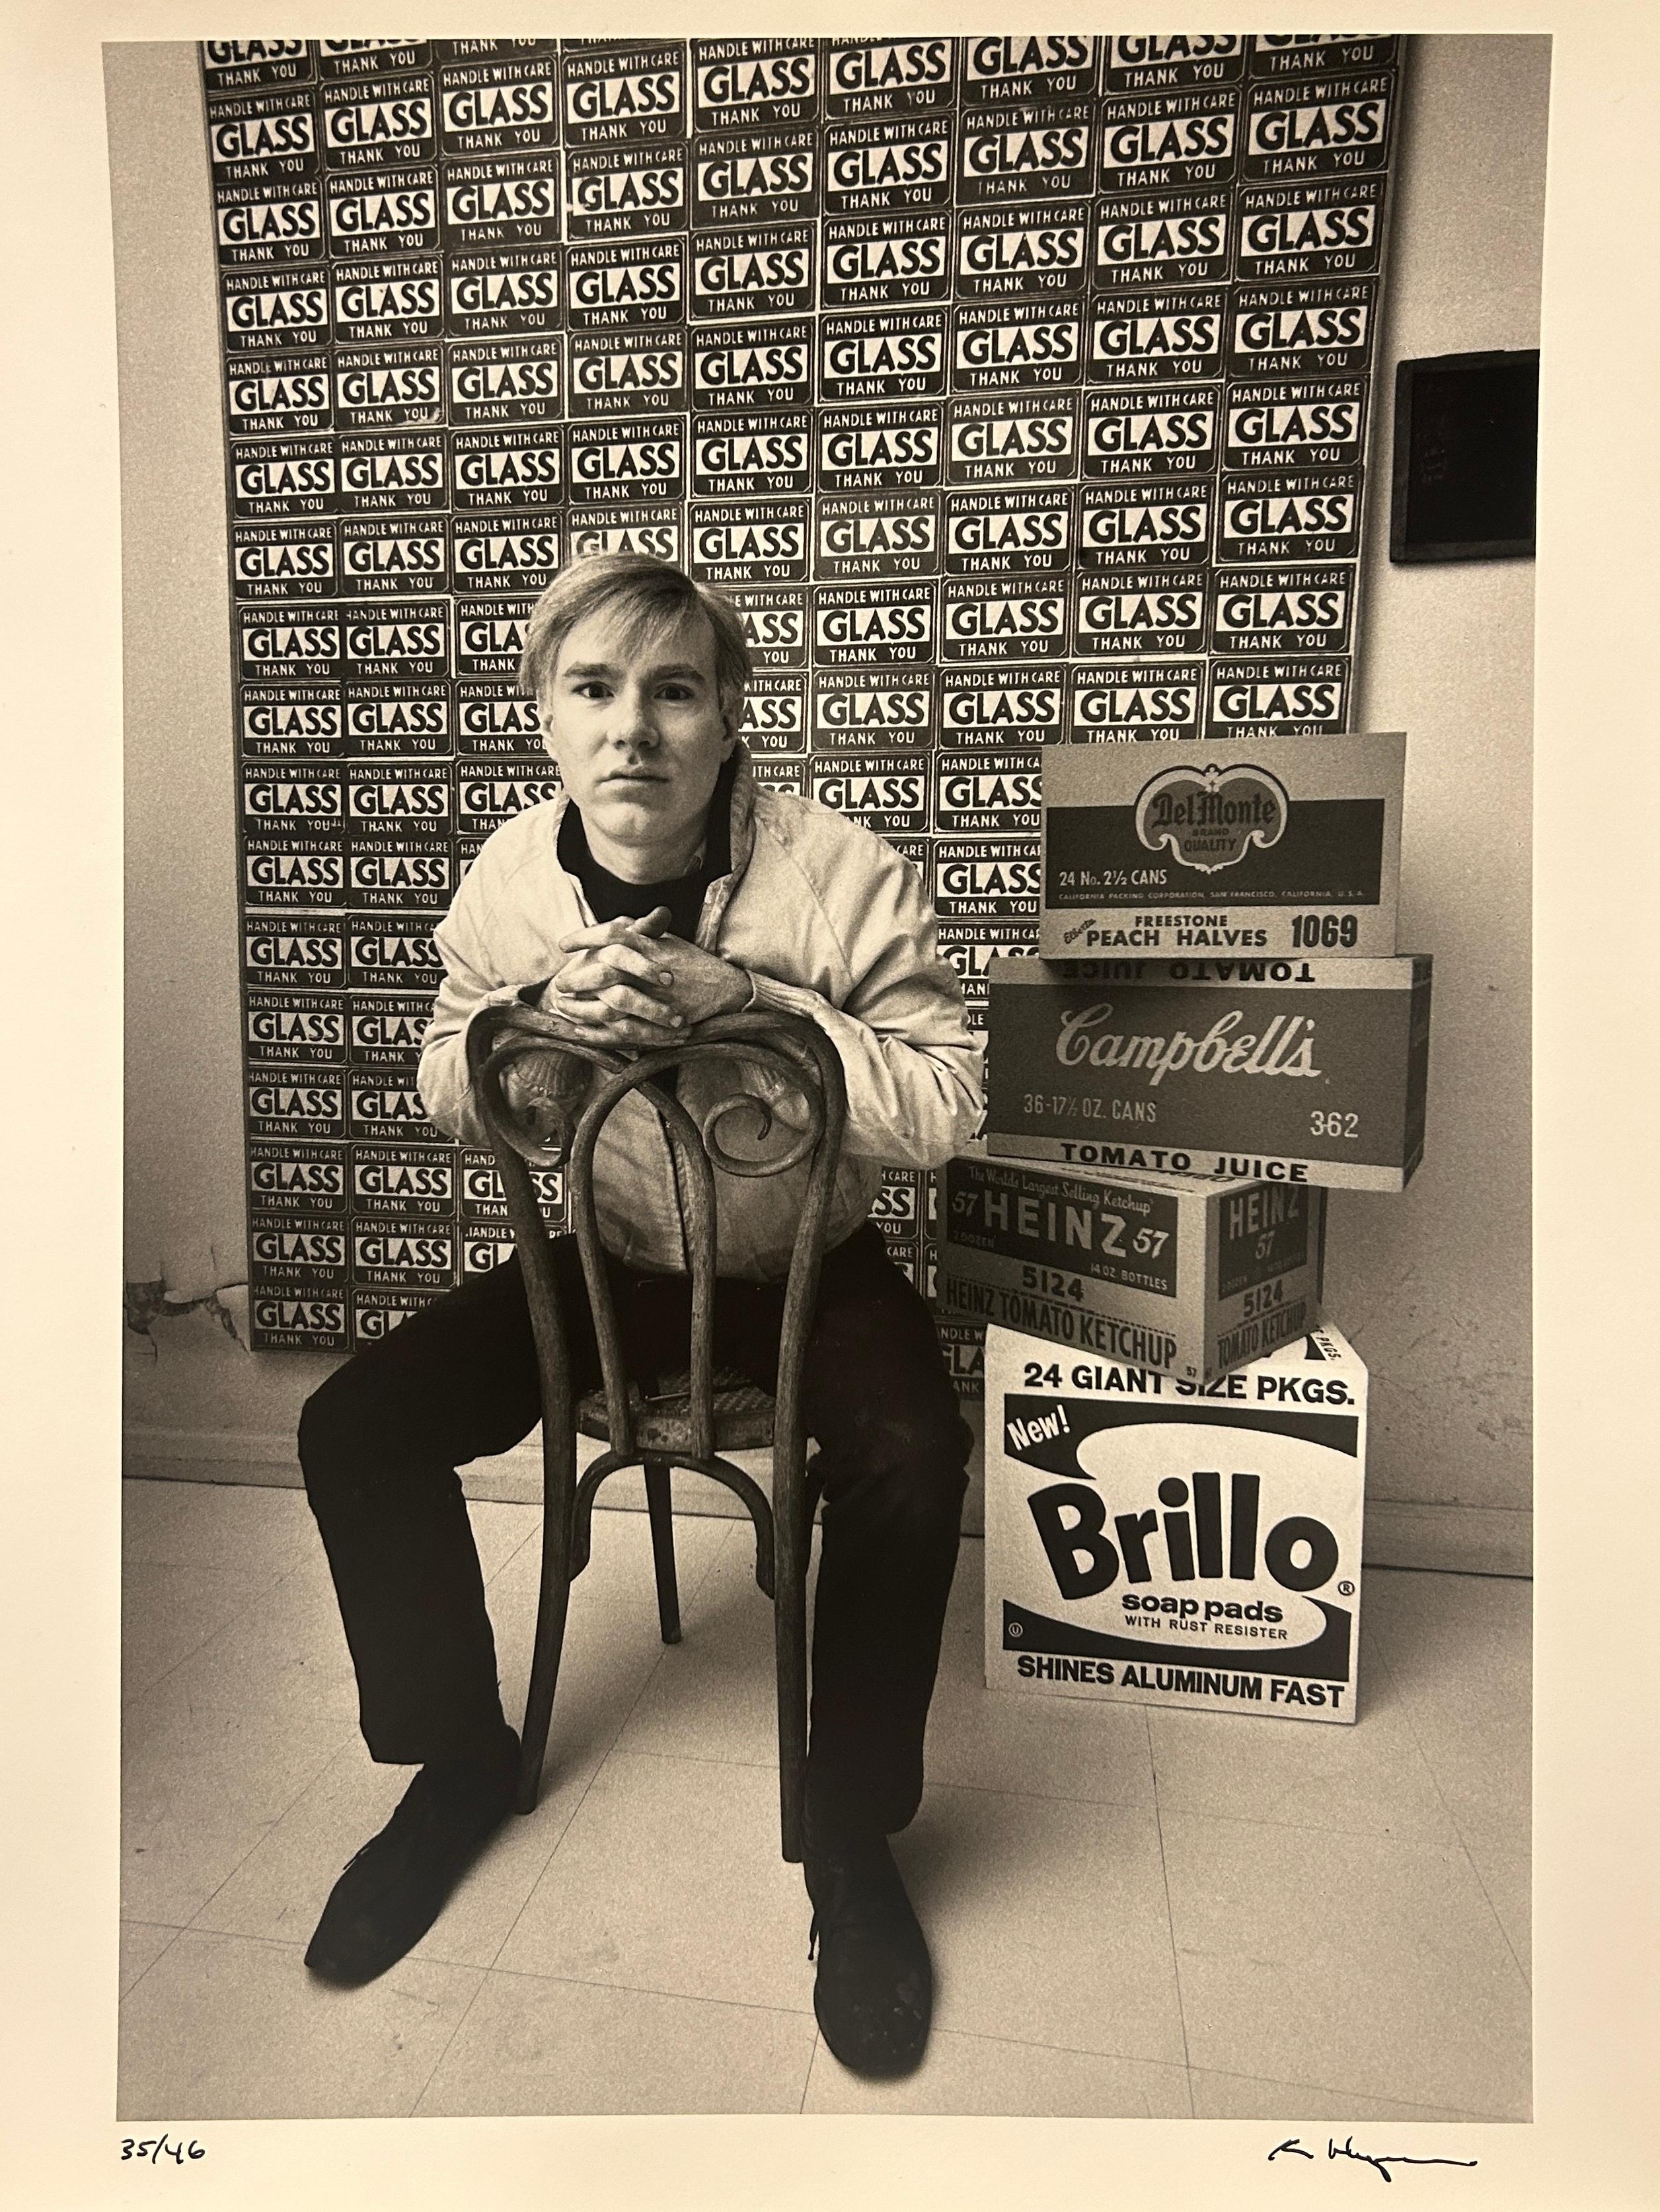 The Pop Artists: Andy Warhol with Boxes - Photograph by Ken Heyman